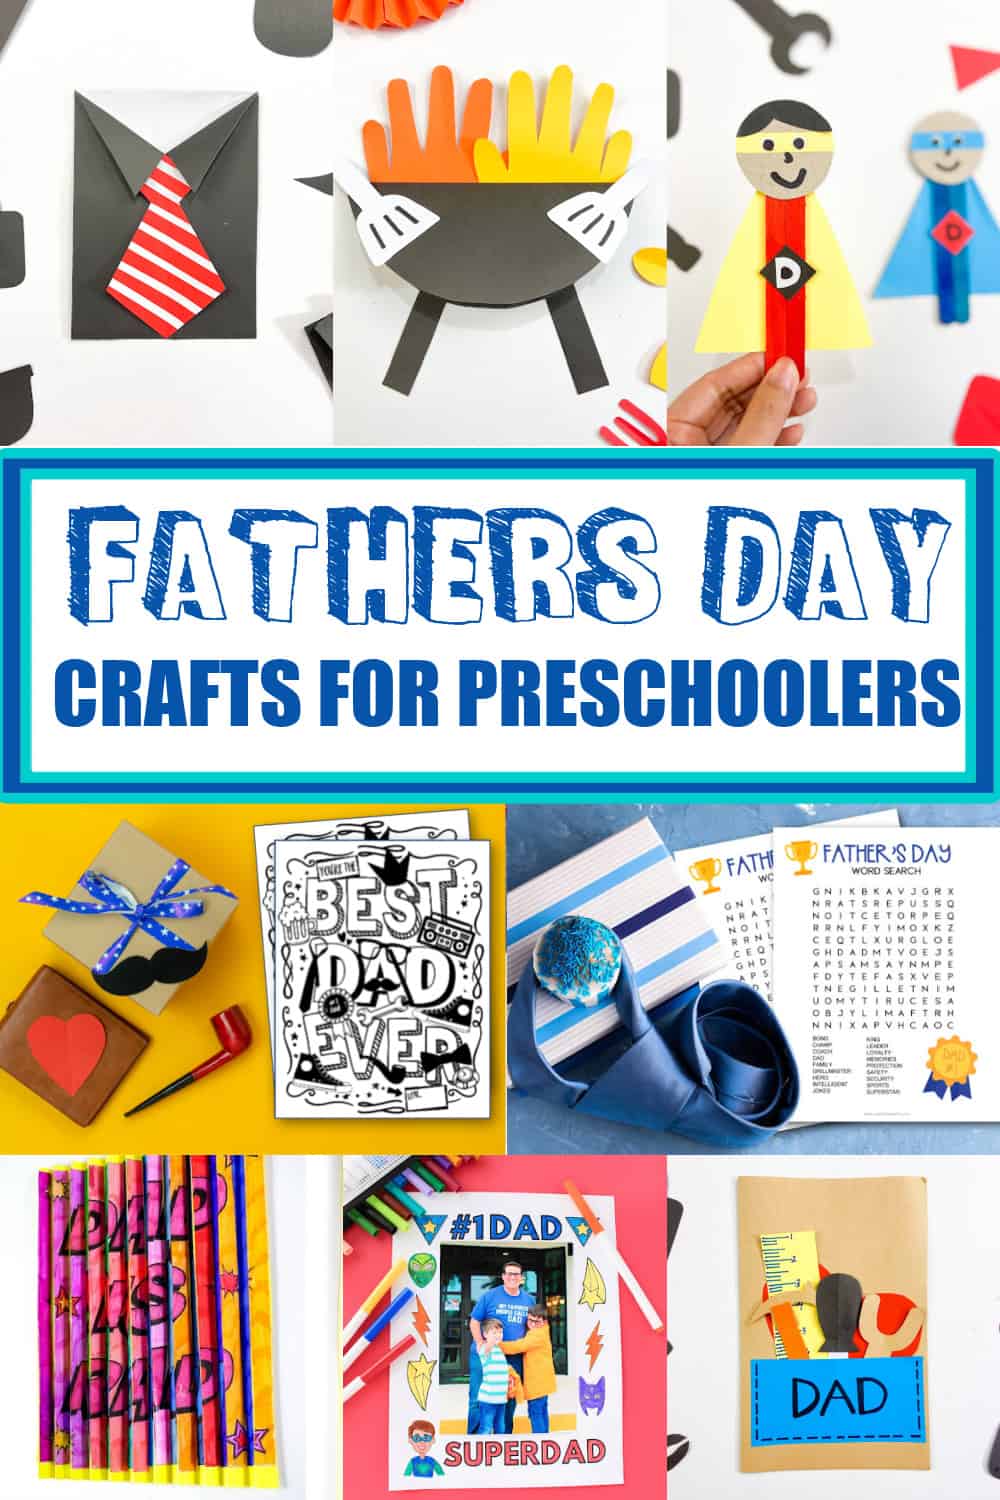 Father's Day Crafts for Preschoolers - Made with HAPPY